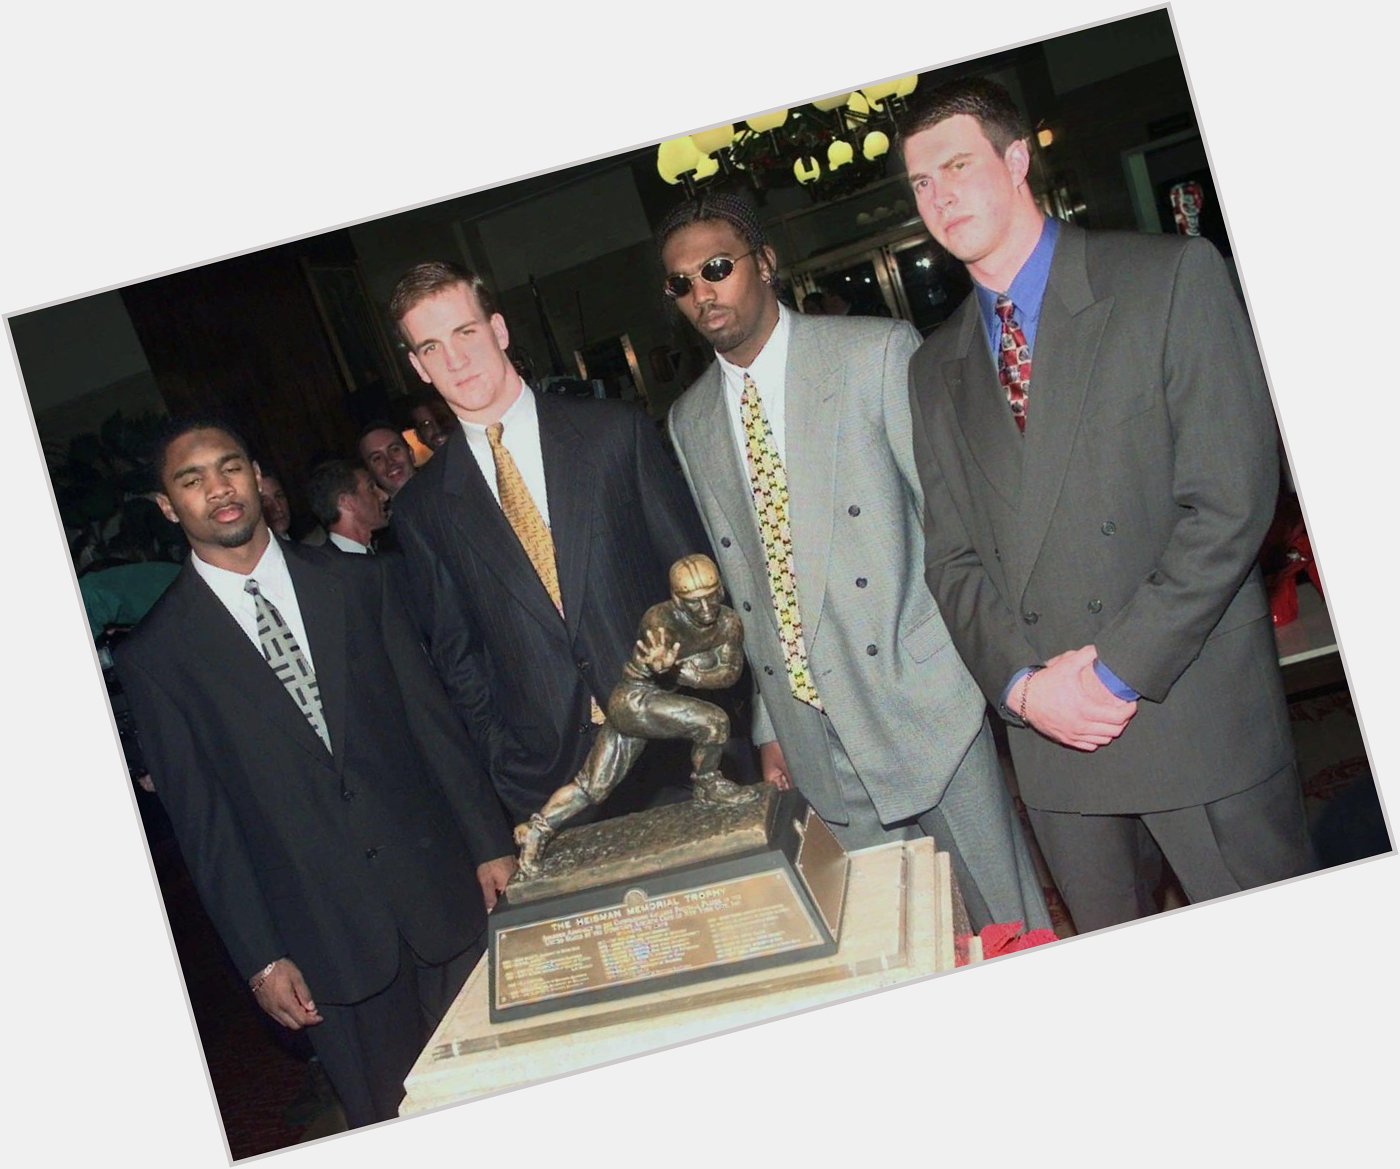 In 1997, 1 of these guys won Heisman & it\s not Peyton Manning or Randy Moss. 

Happy 39th Birthday, Charles Woodson. 